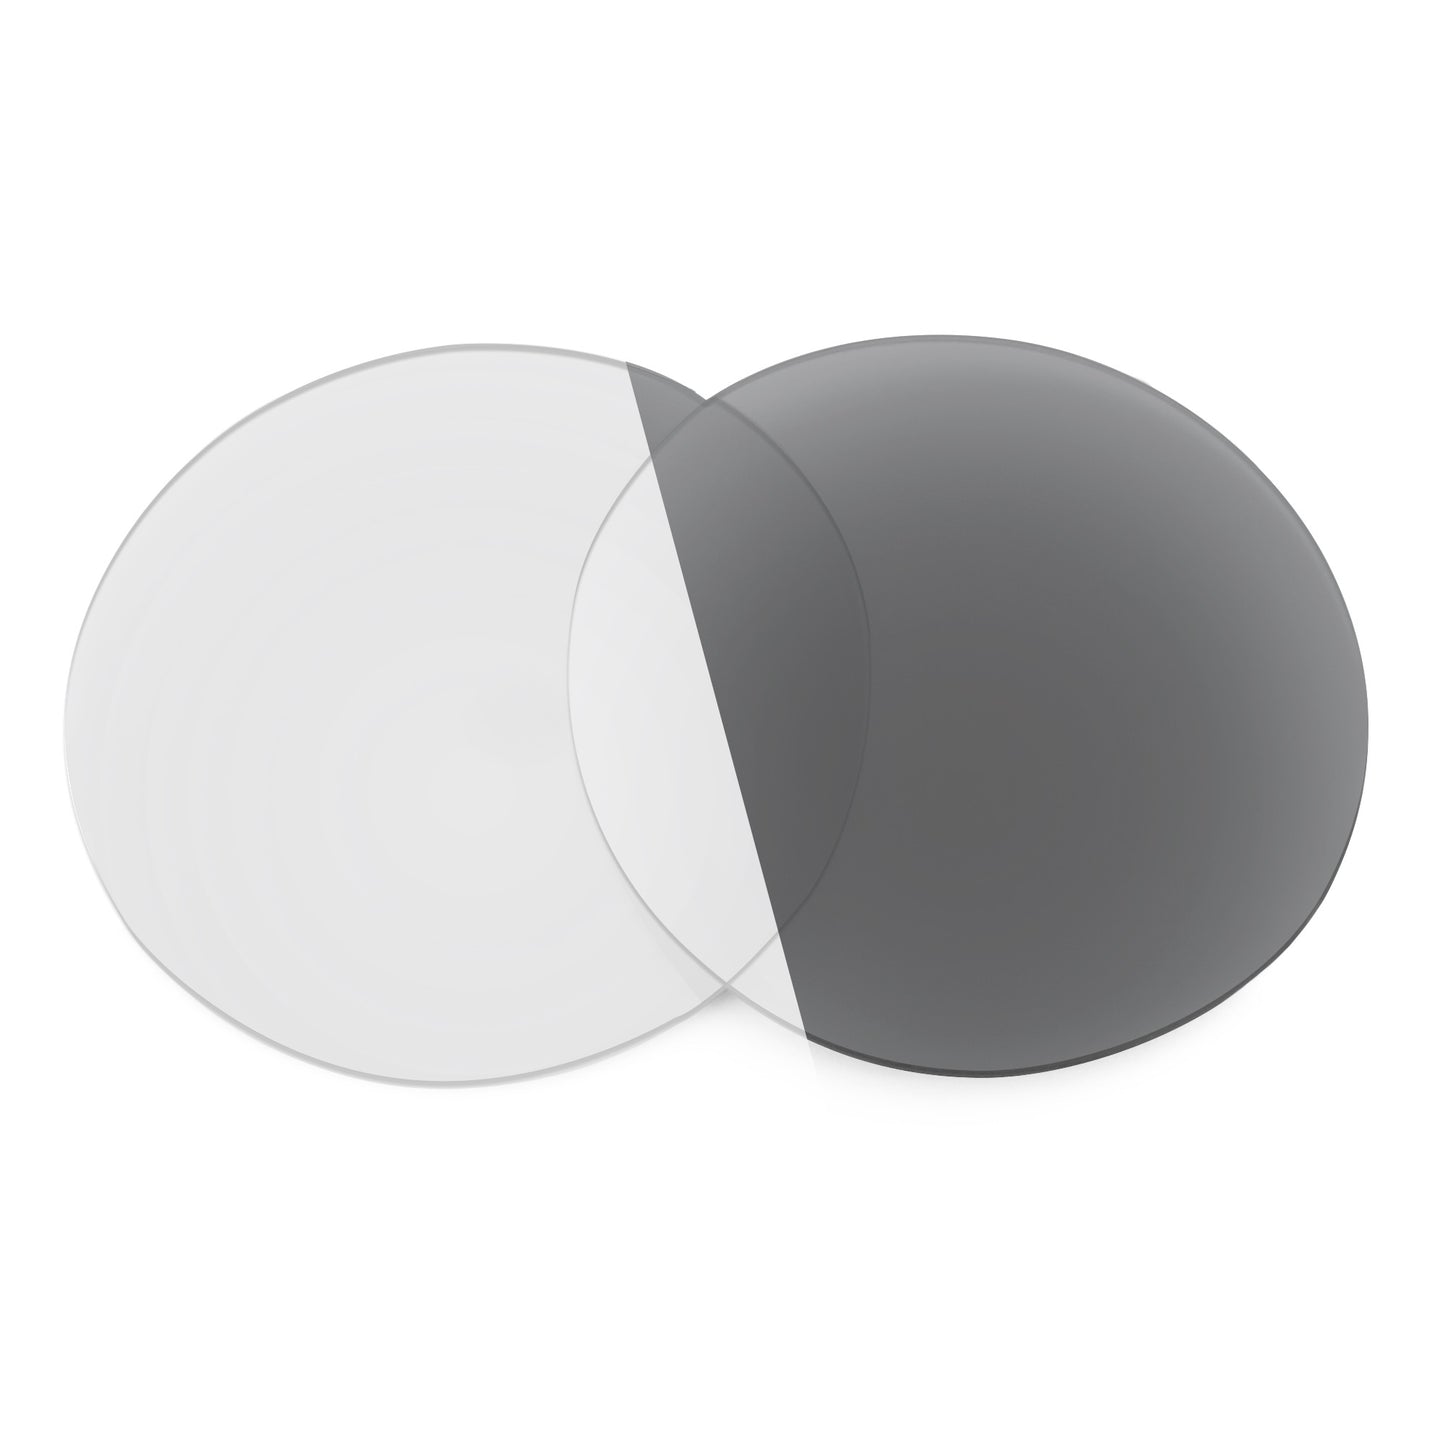 Revant replacement lenses for Ray-Ban Clubmaster Aluminum RB3507 49mm Non-Polarized Adapt Gray Photochromic